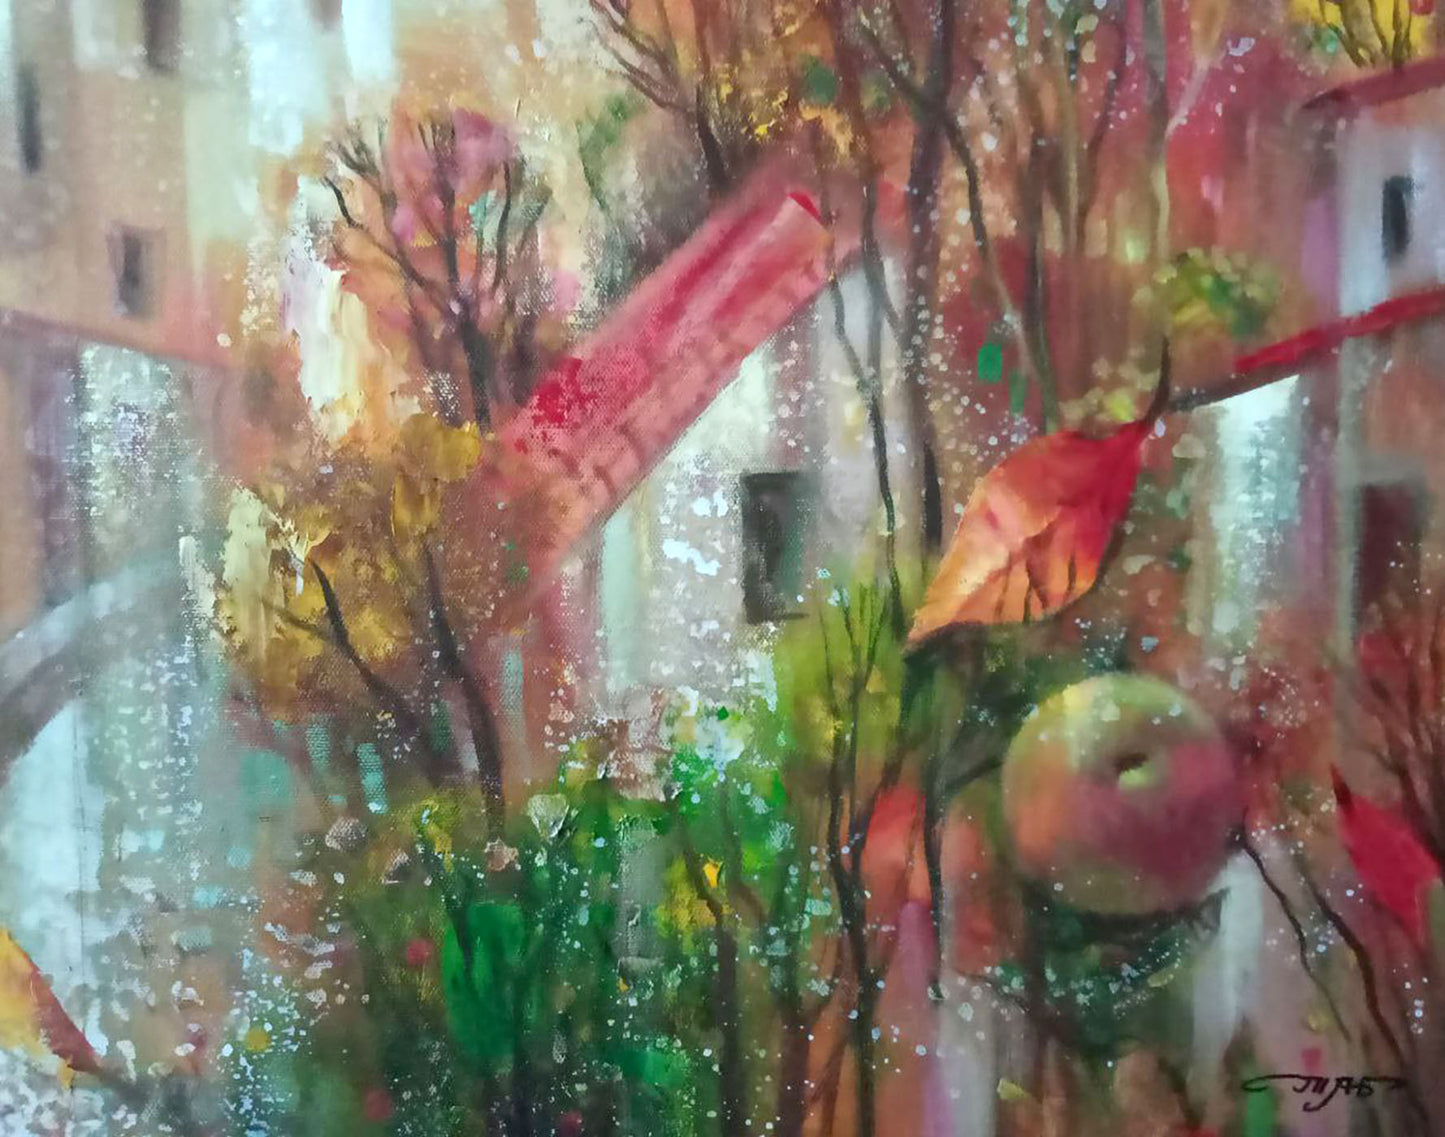 Colorful abstract oil painting "Autumn in the City" by Borisovich Tarabanov.